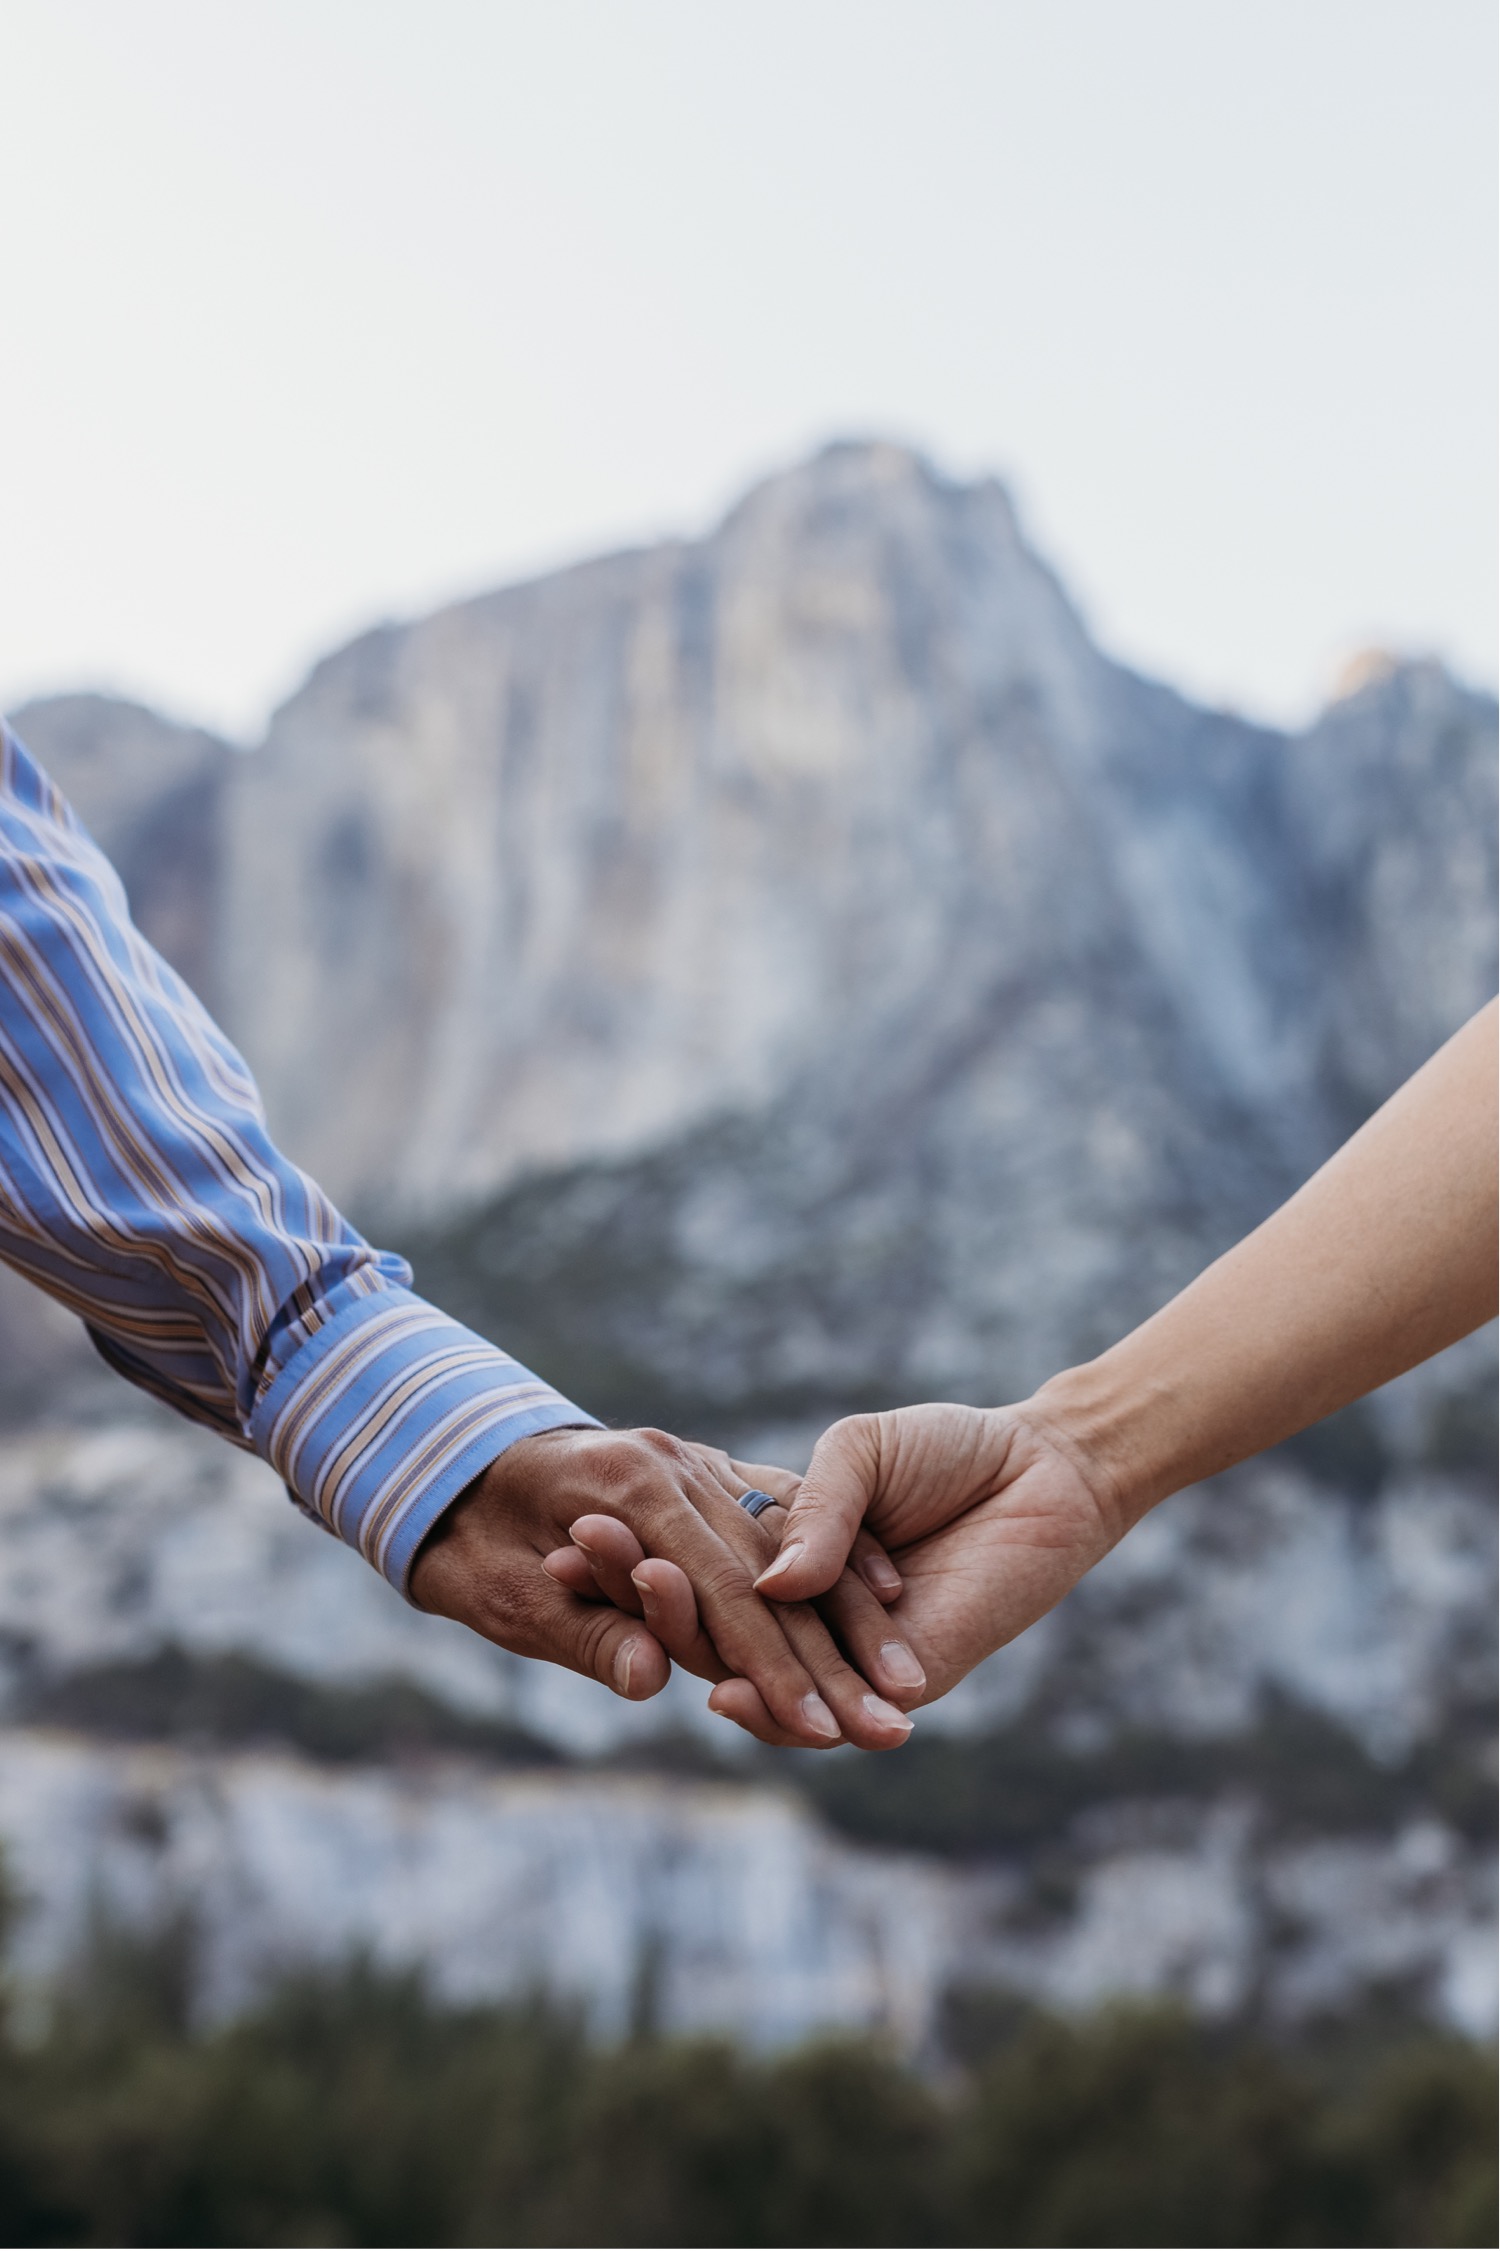 Up close image of two hands holding with a view of Yosemite in the distance taken by Yosemite photographer Liz Koston.